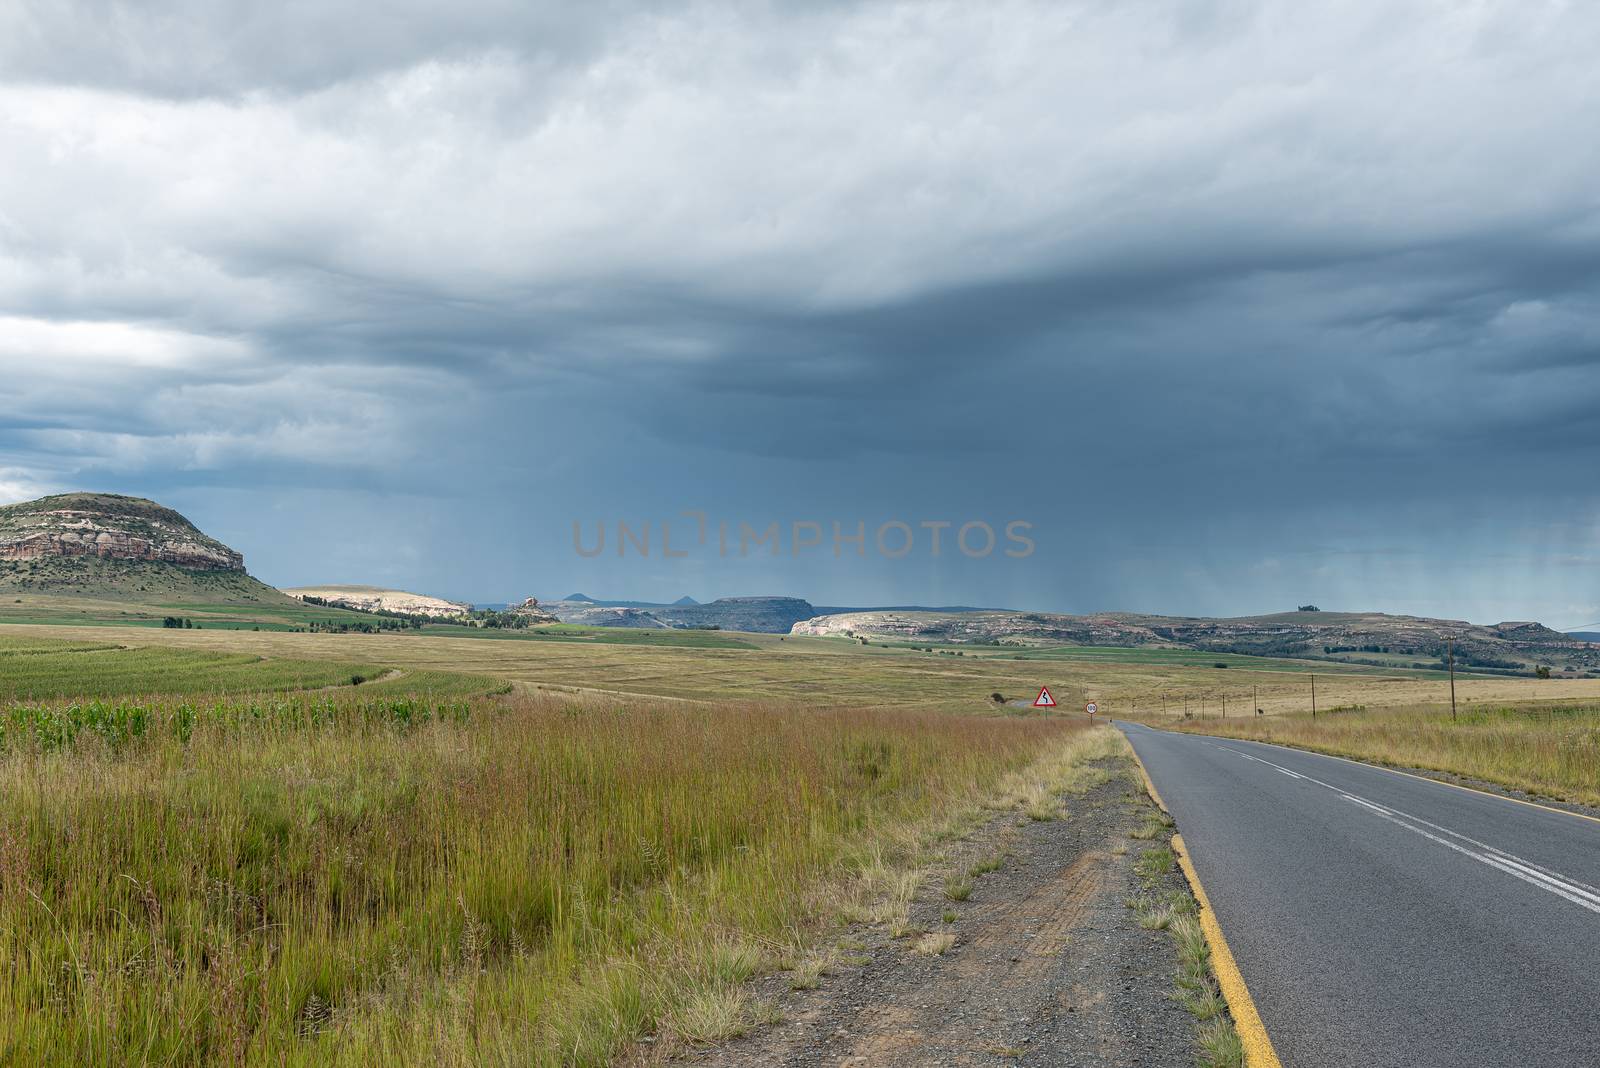 The landscape on road R26 to the south of Fouriesburg. A thunderstorm is visible